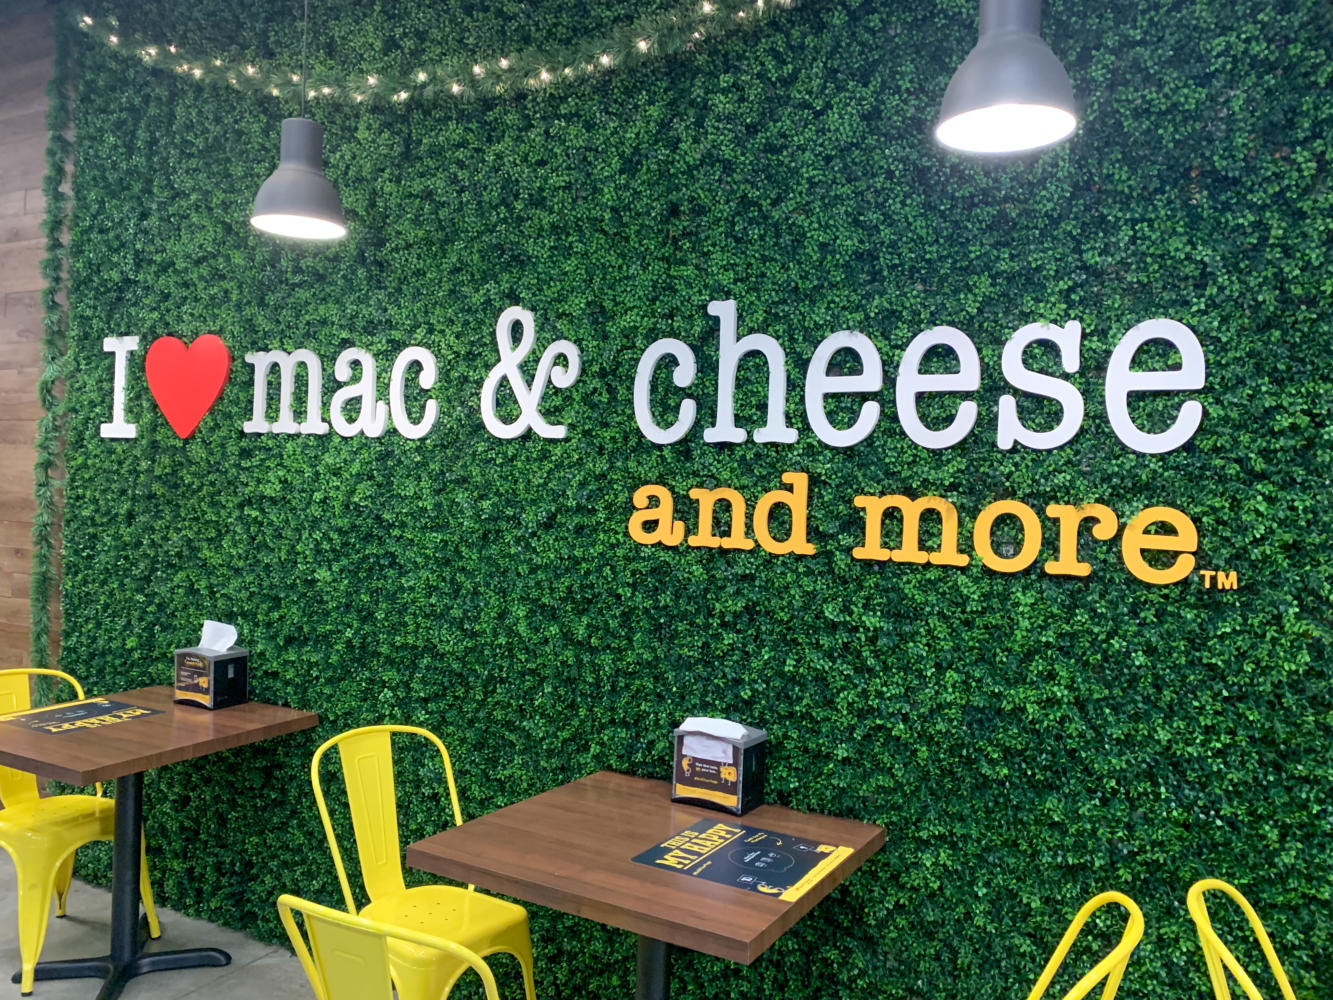 Experience True Love at ‘I Heart Mac and Cheese’